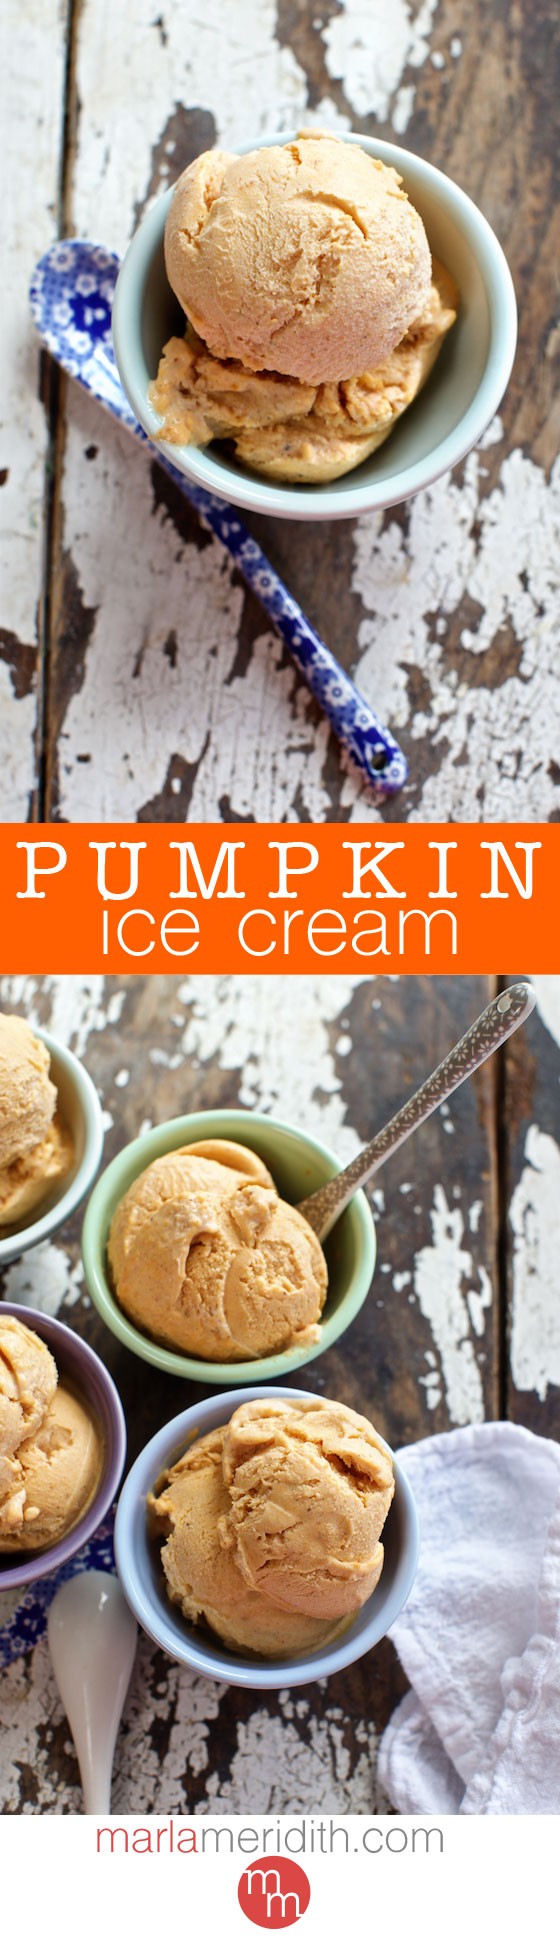 Pumpkin Ice Cream | This dessert recipe is bursting with fall flavors! MarlaMeridith.com ( @marlameridith )